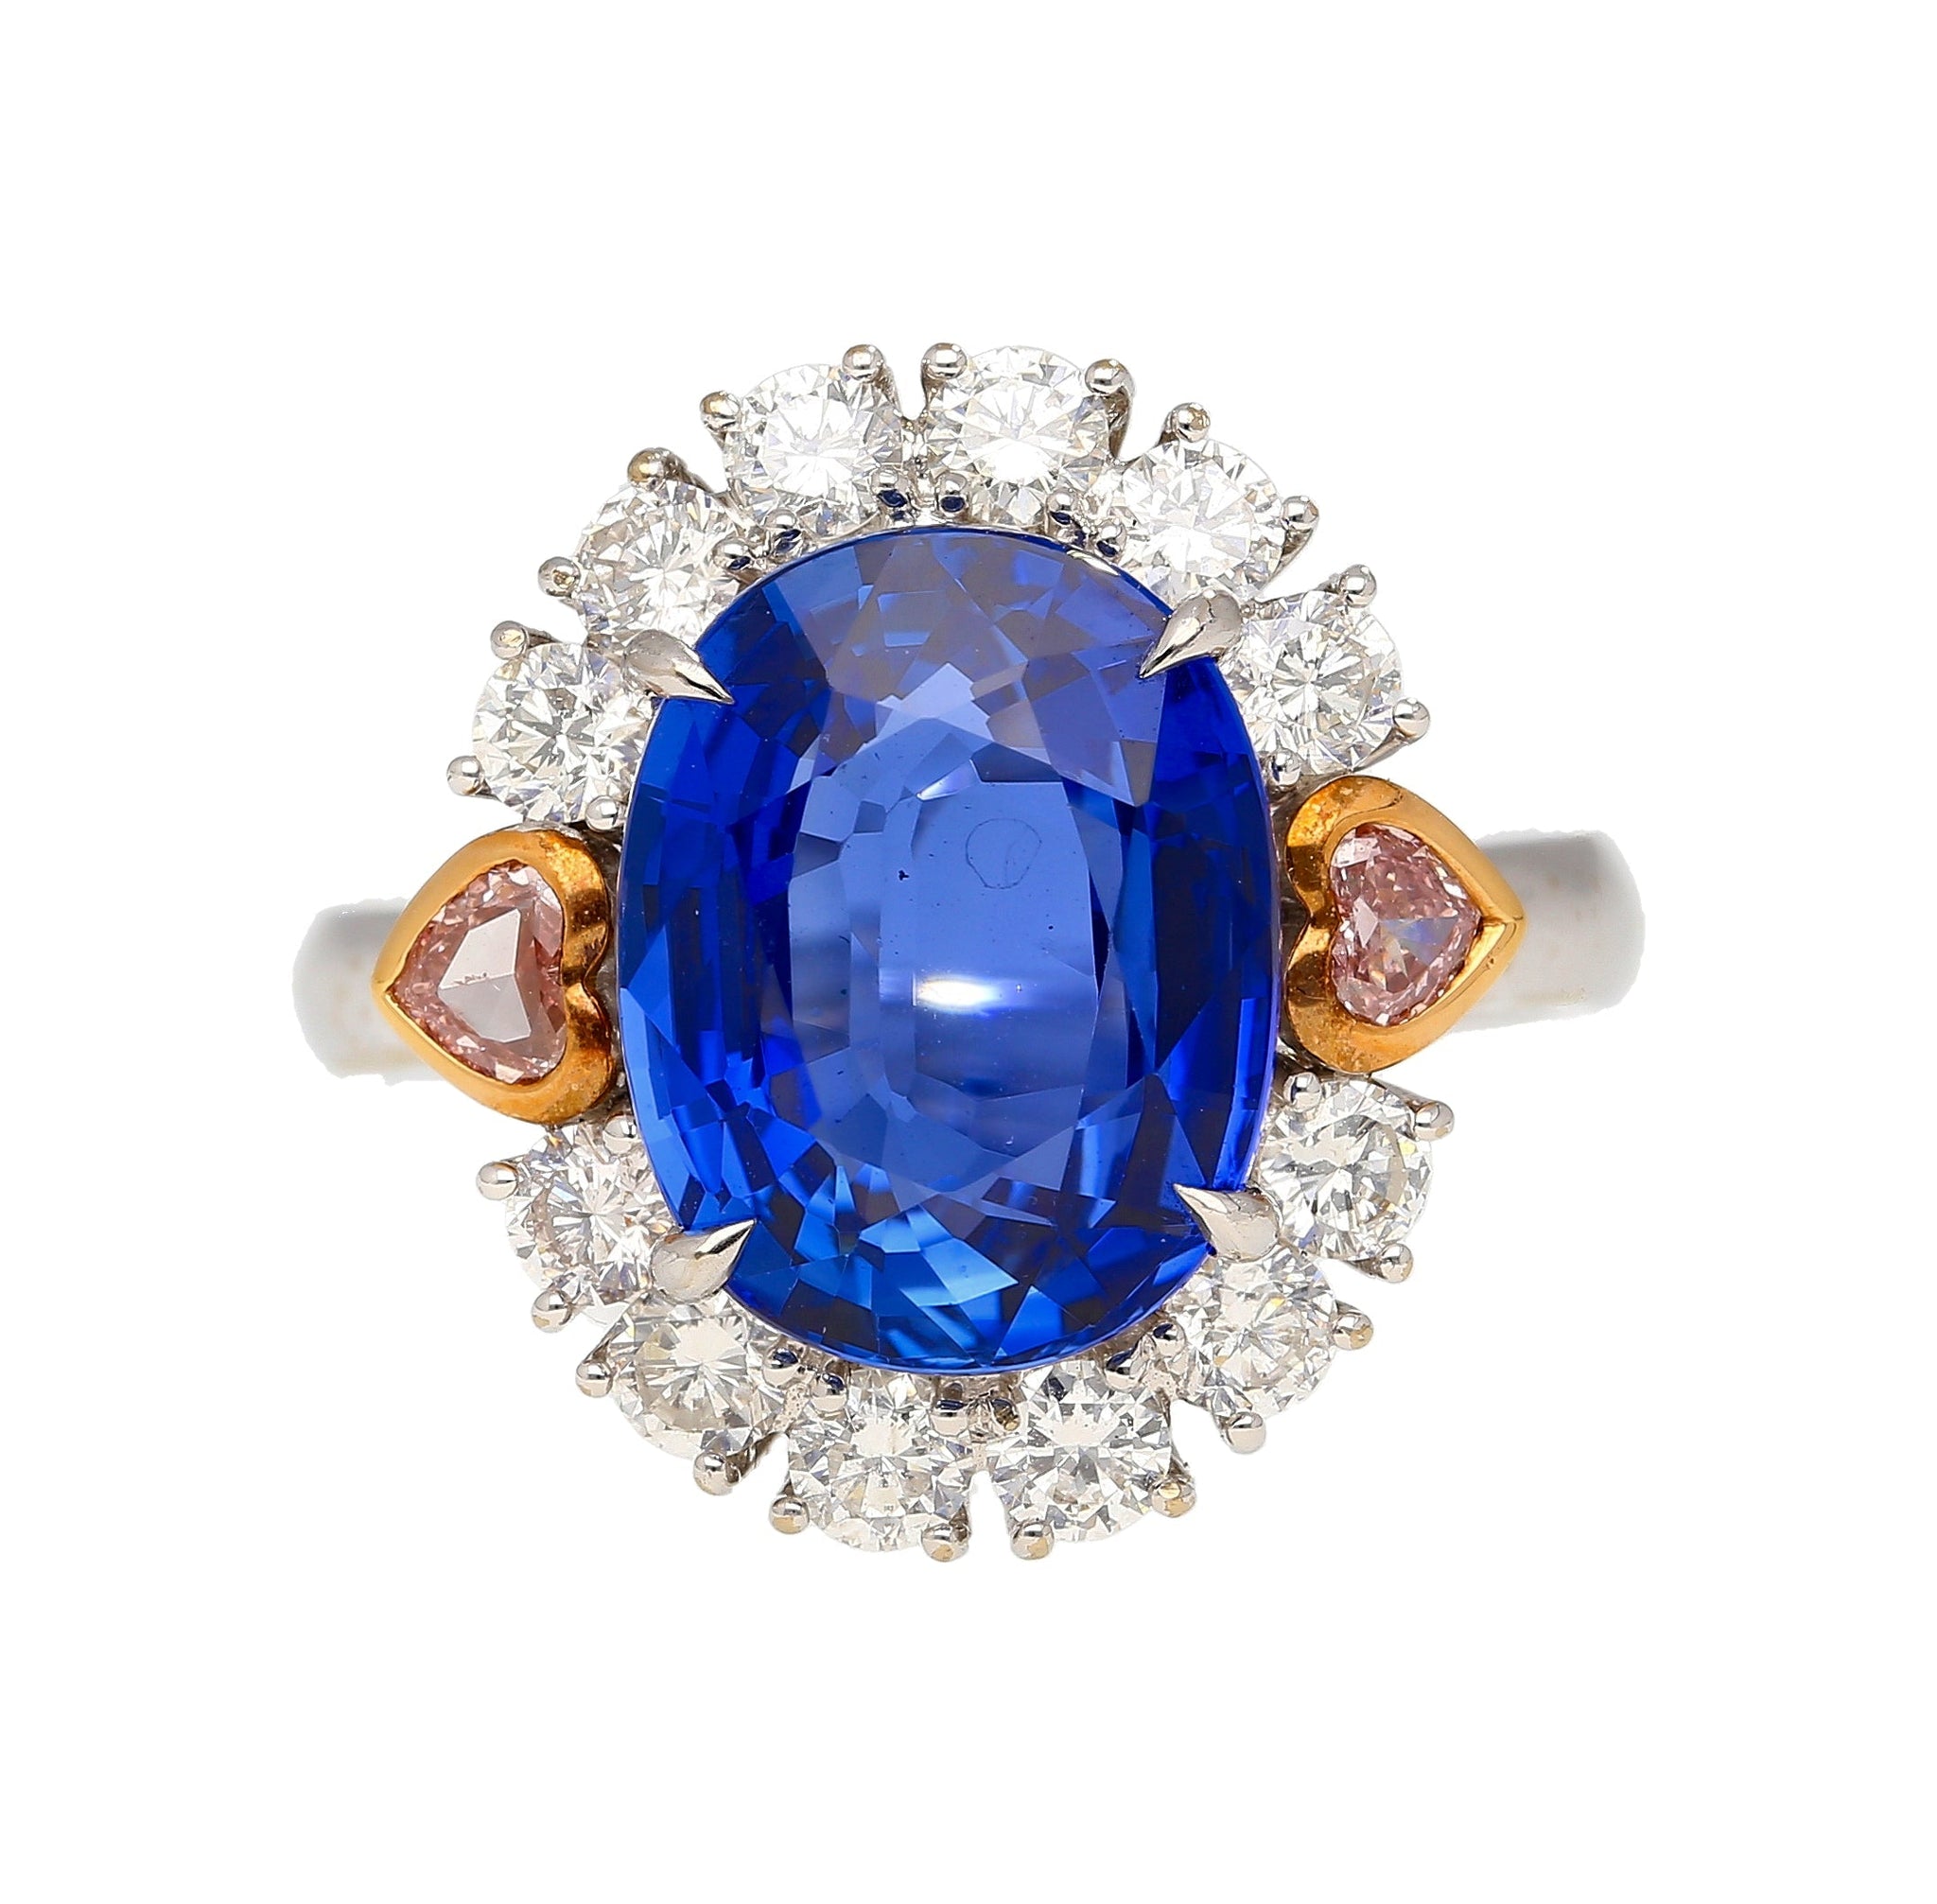 GRS Certified 7.25 Carat No Heat Oval Cut Blue Sapphire Ring With Pink Diamond Sides